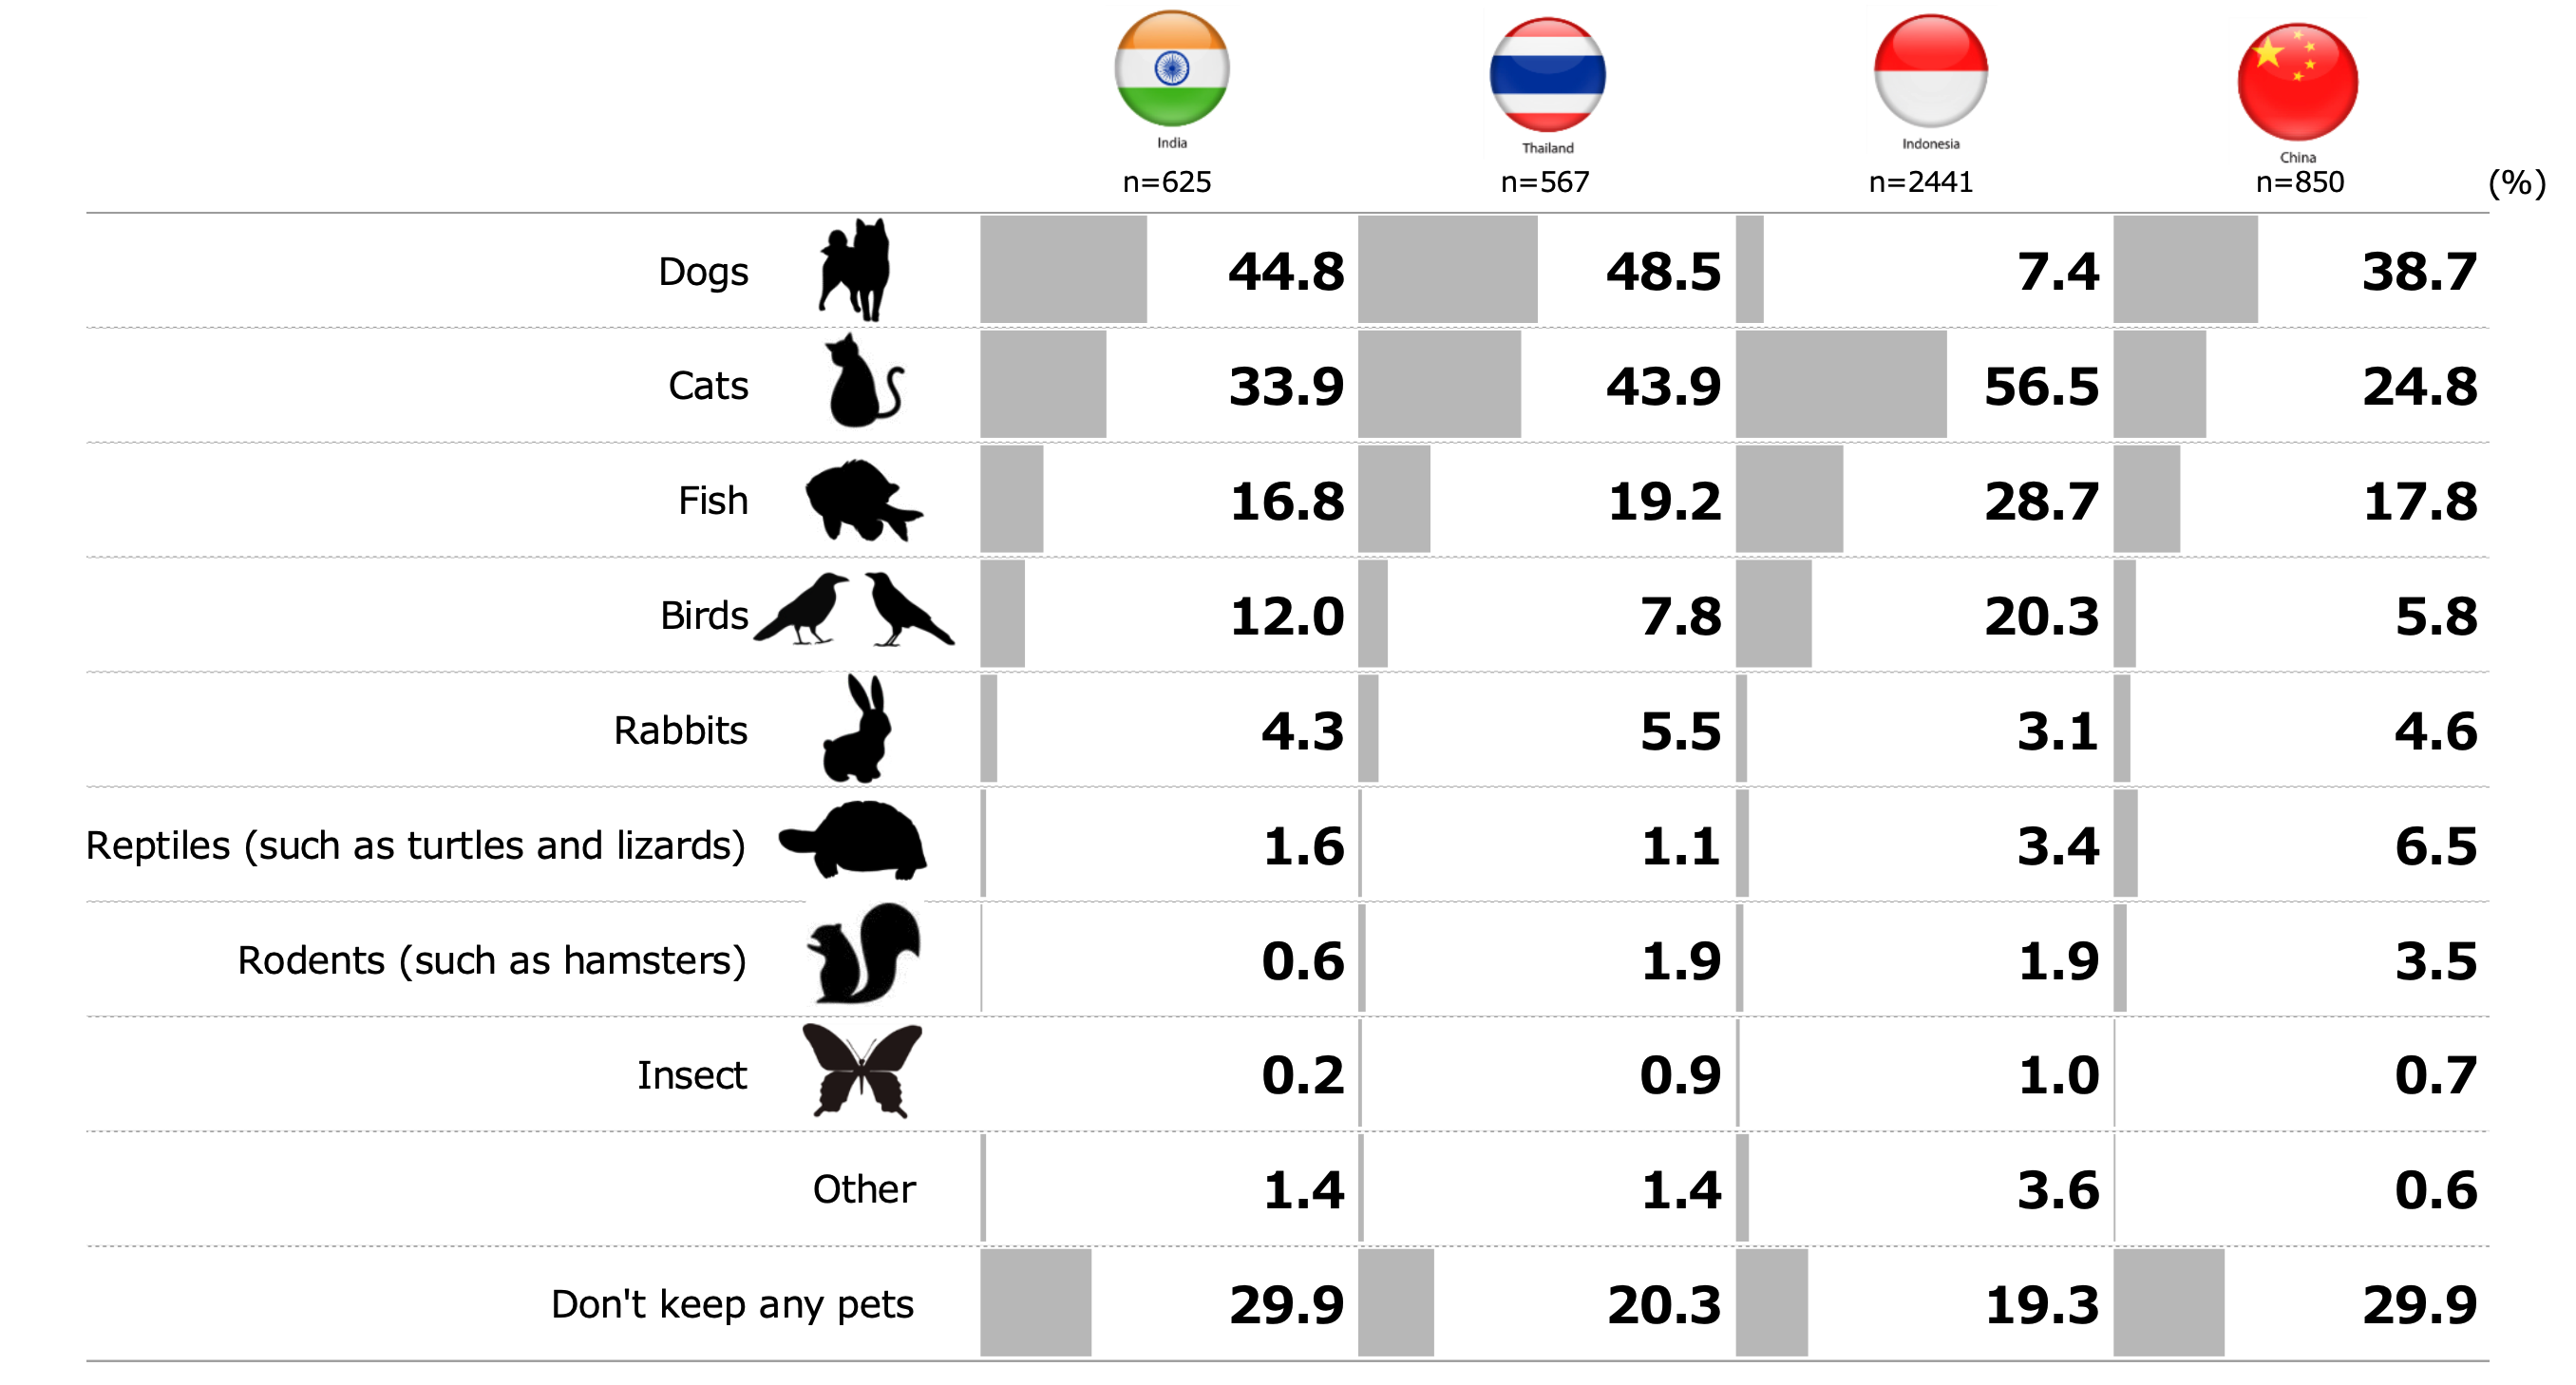 ownership-rate-of-pets-by-type